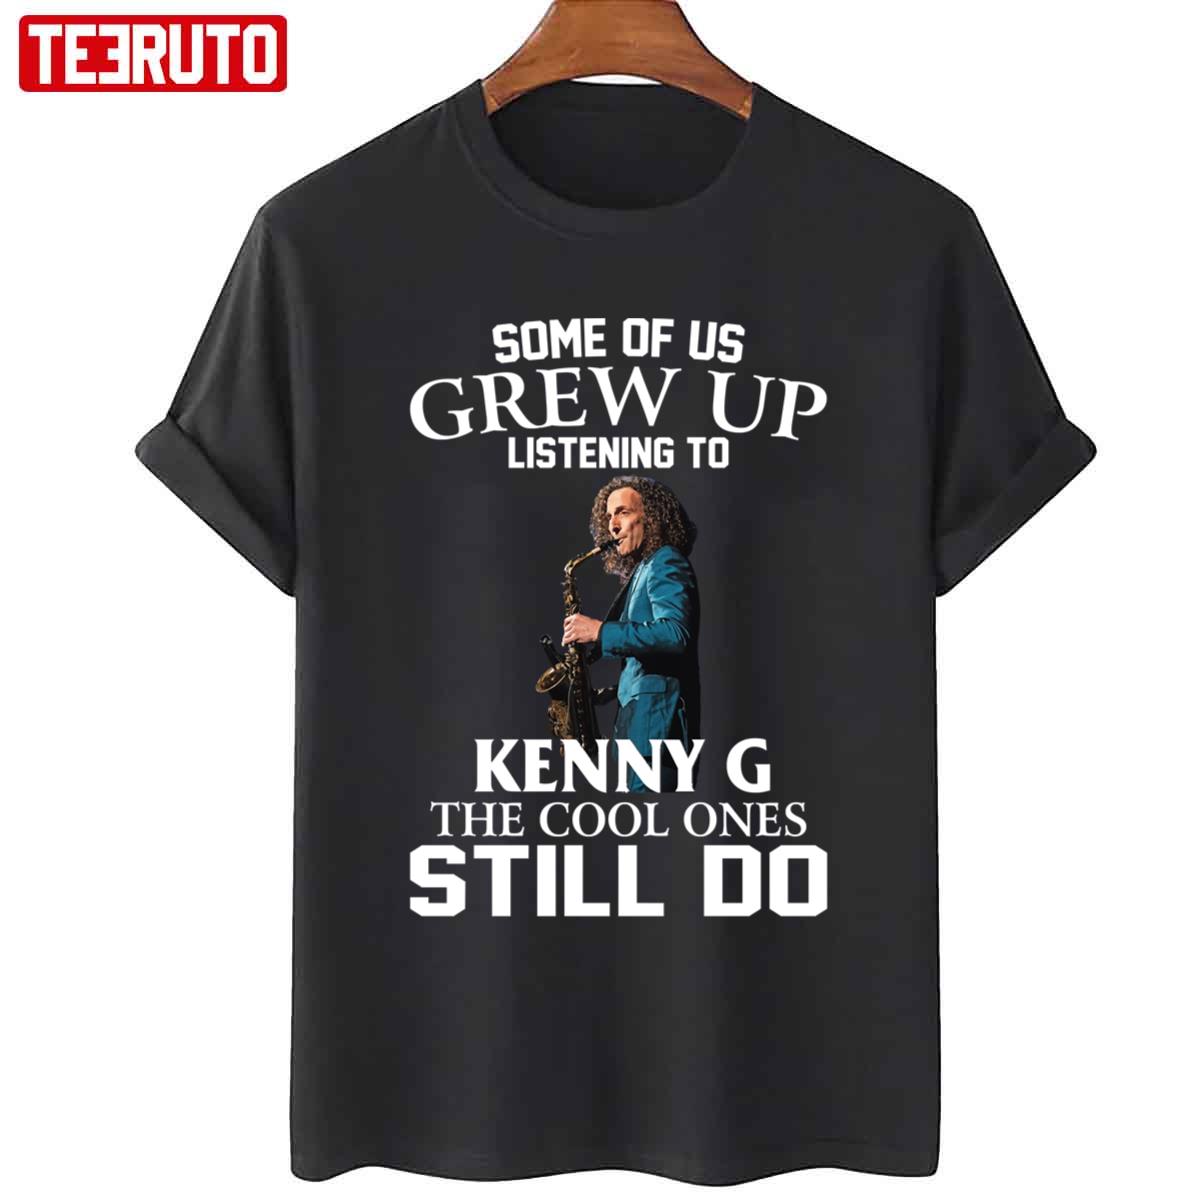 Some Of Us Grew Up Listening To Kenny G The Cool Ones Still Do Unisex Sweatshirt